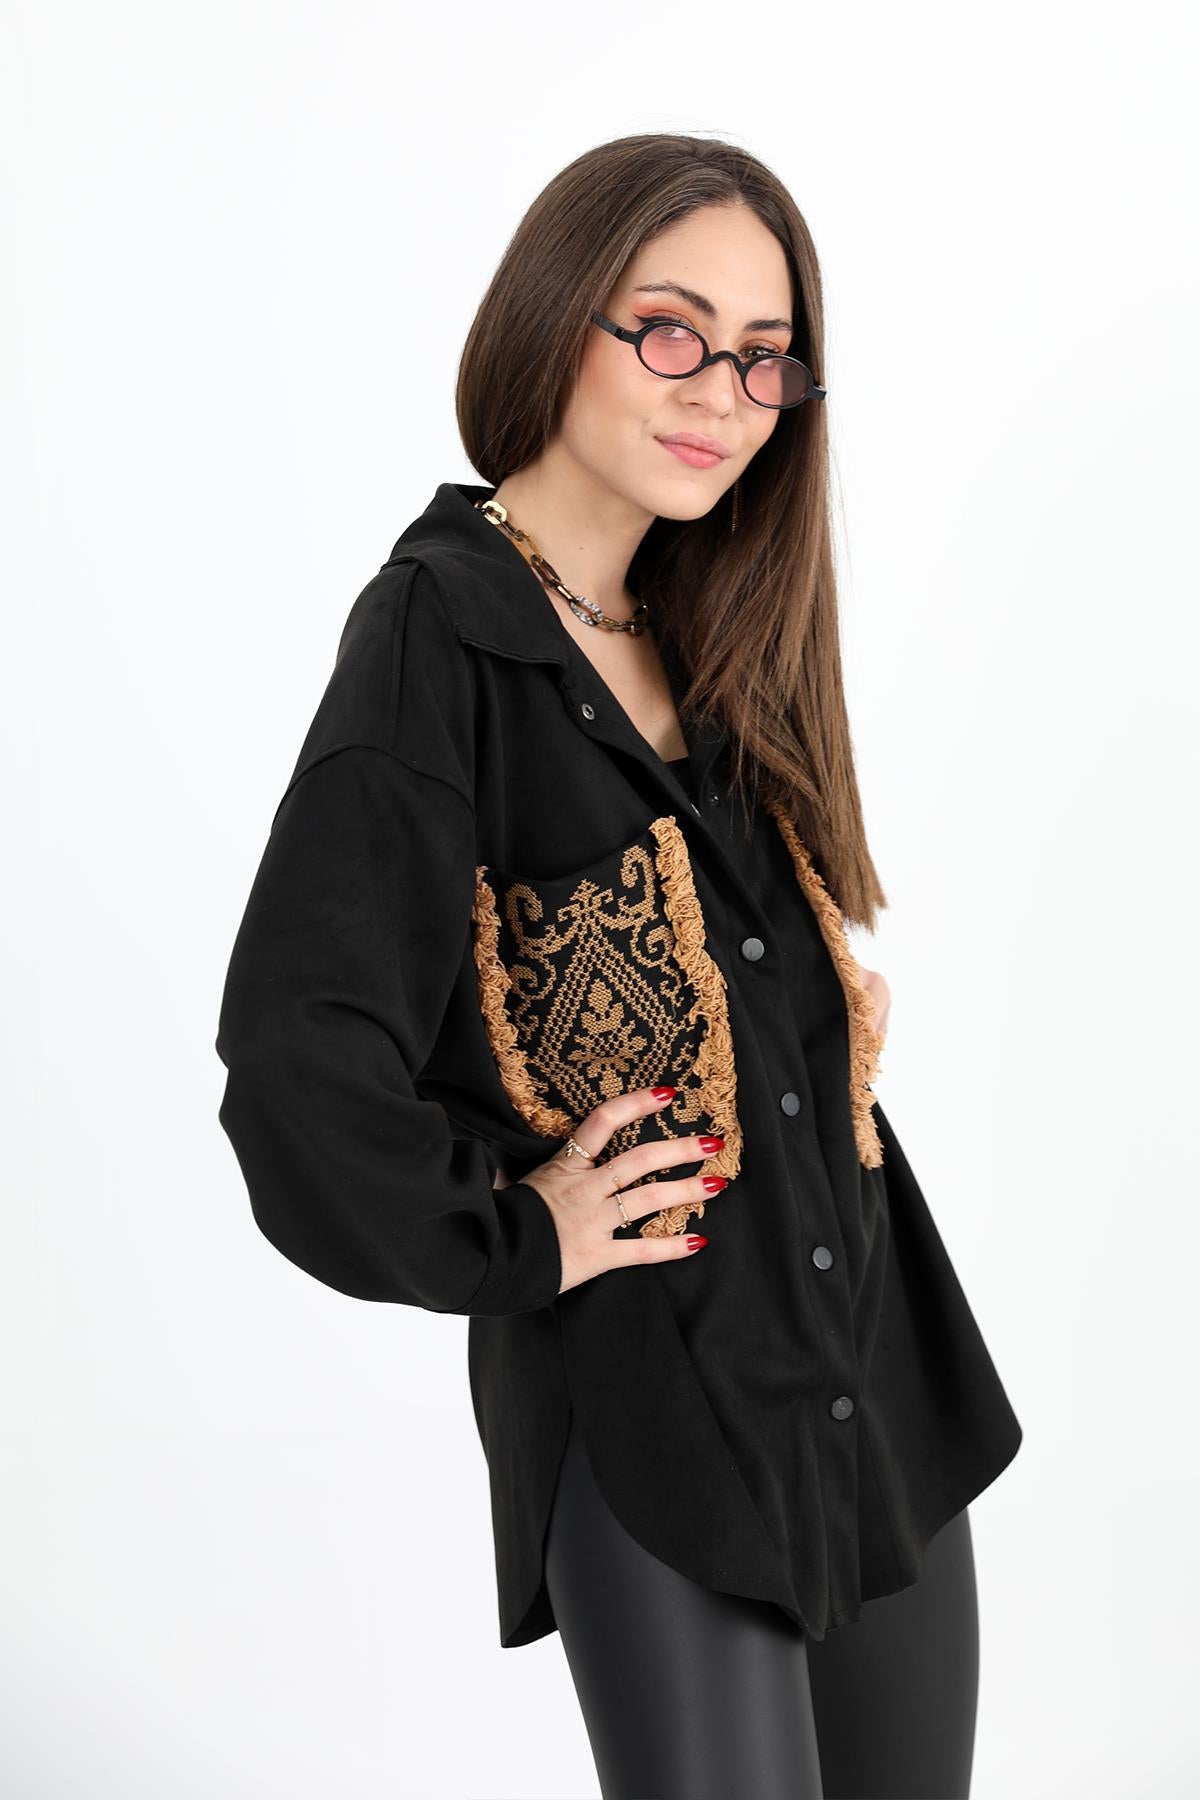 Women's Shirt Pocket Tasseled Embroidered Suede - Black - STREETMODE™